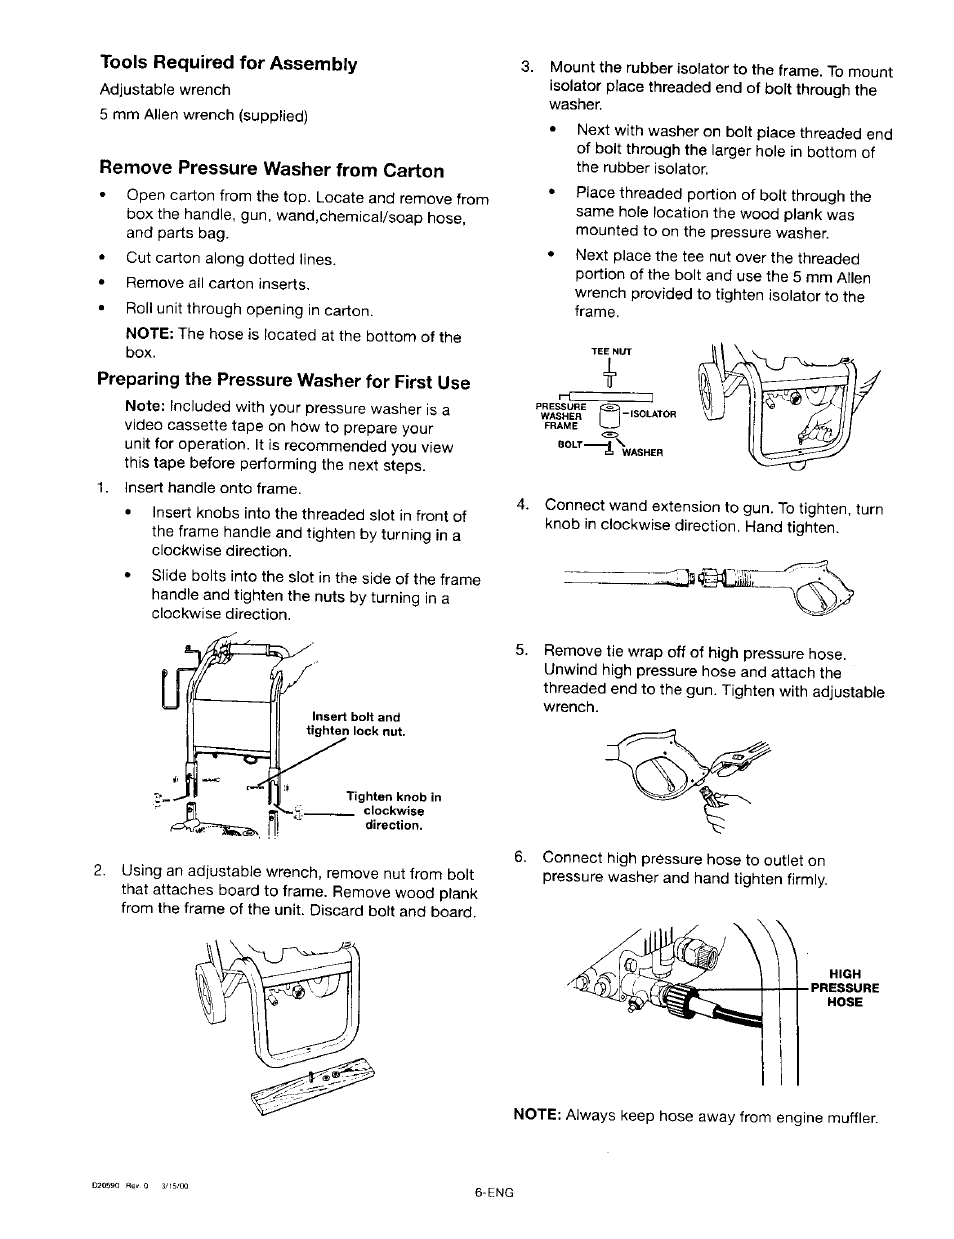 Tools required for assembly, Remove pressure washer from carton, Preparing the pressure washer for first use | Craftsman 919.670280 User Manual | Page 6 / 28